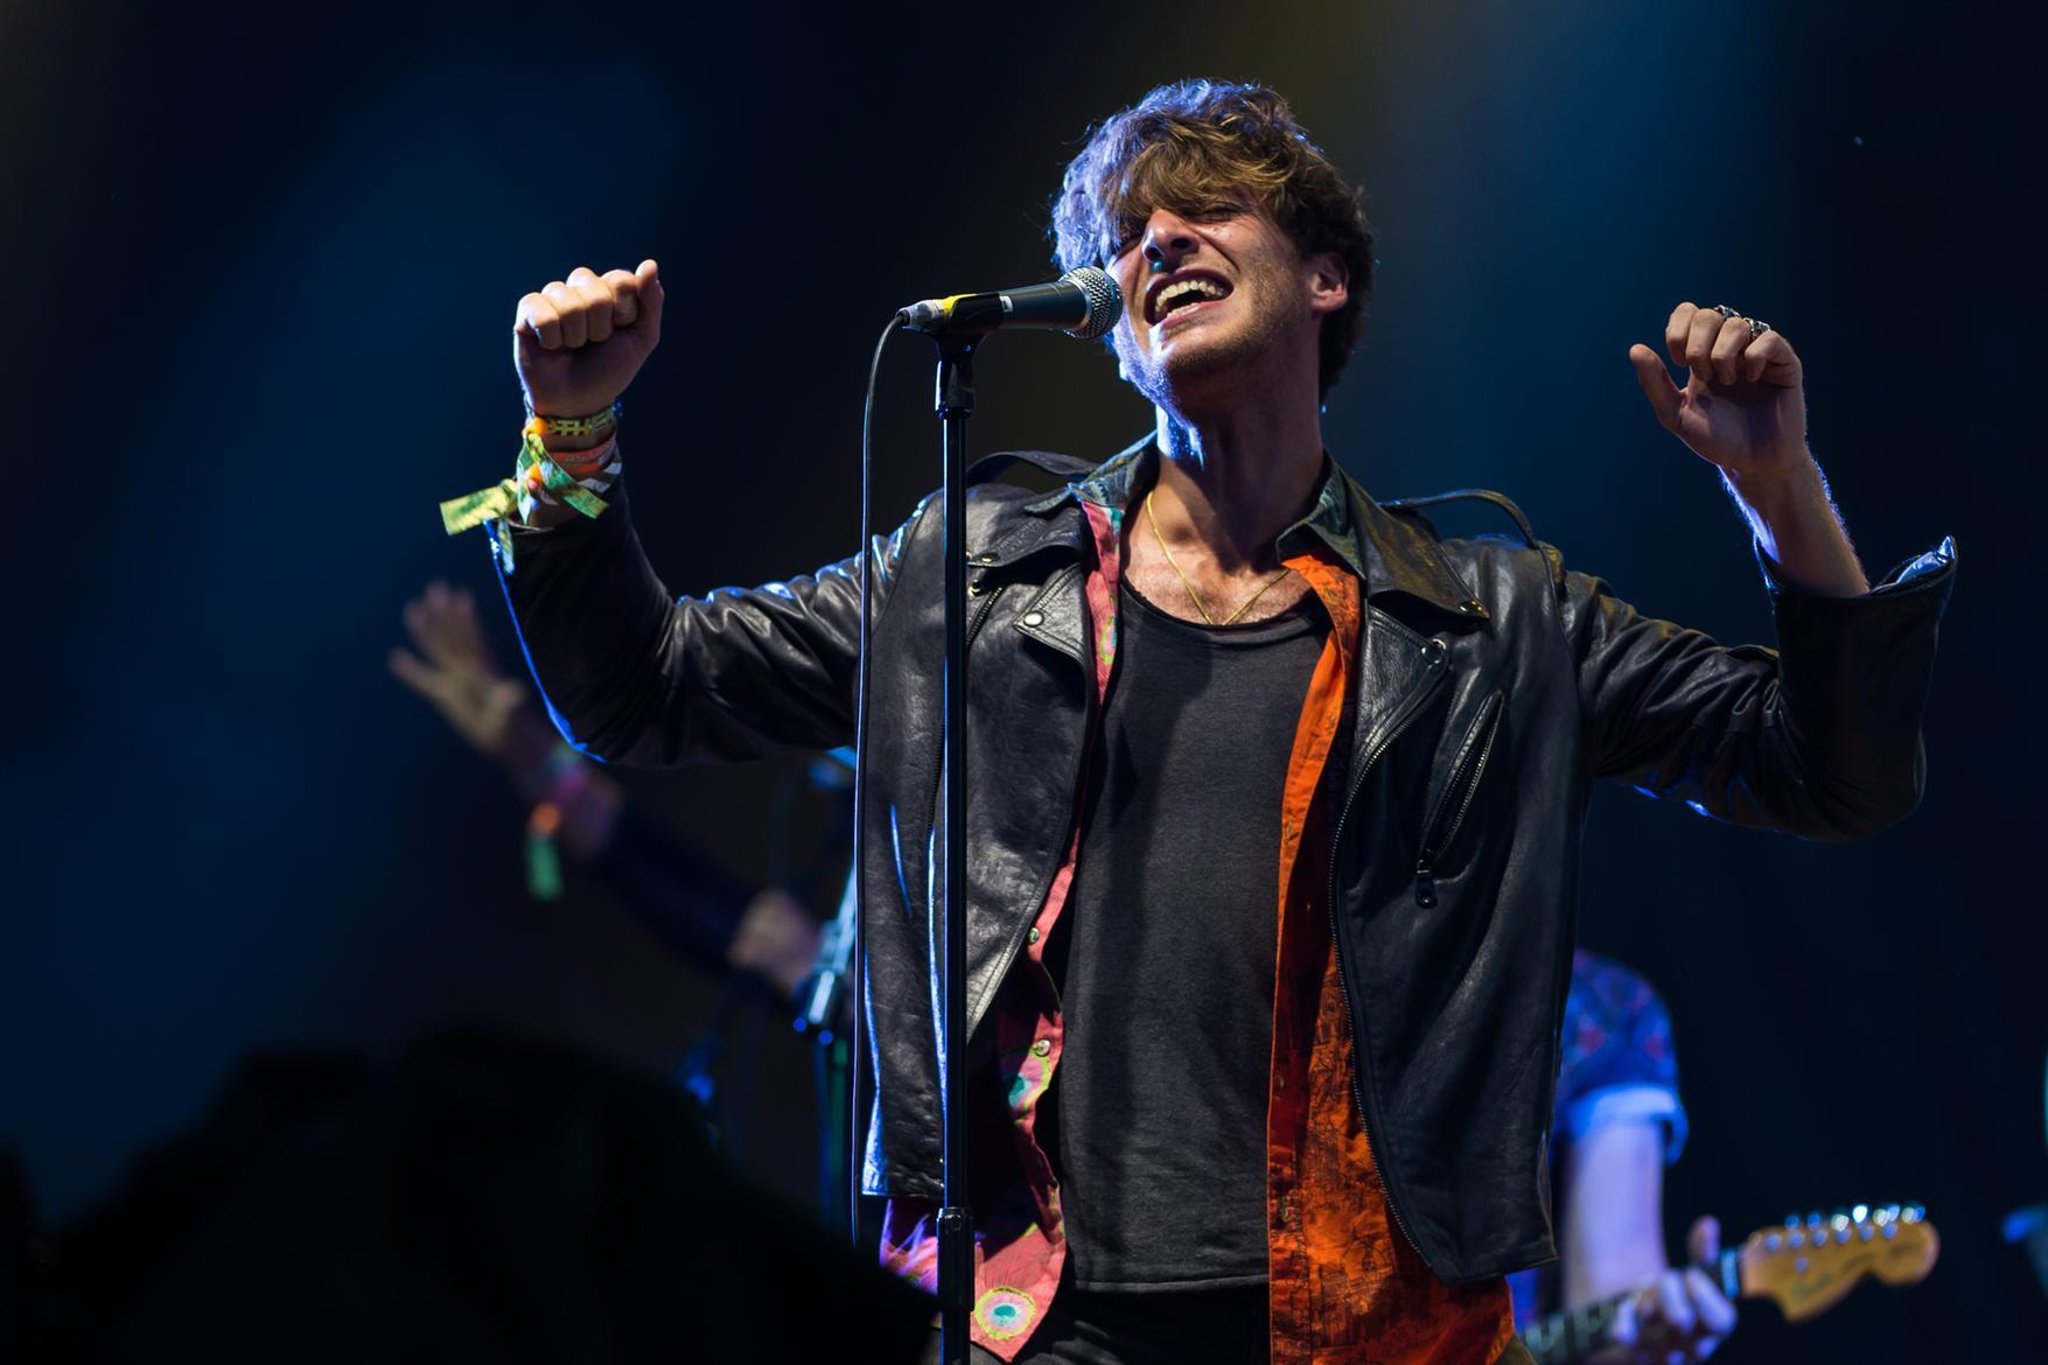 Paolo Nutini returns to Belfast headlining at a Custom House Square concert